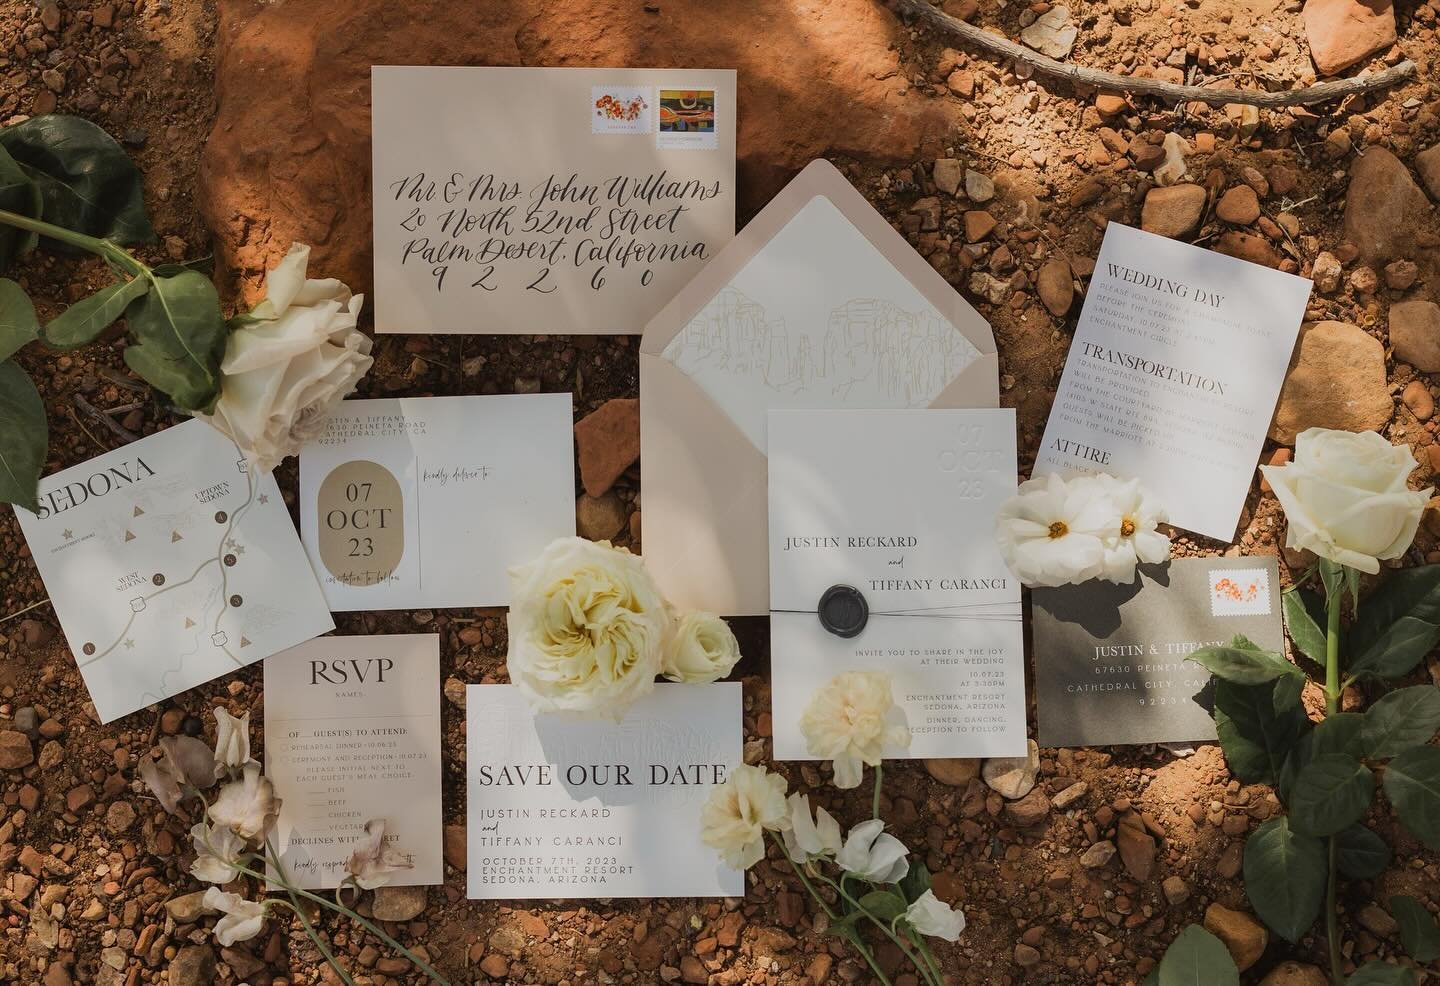 It&rsquo;s heating up around here (literally, in temperature, but also as related to the never ending to-do list 🫠) so I&rsquo;ll just look back at some beautiful October weddings in Sedona. ✨ Nothing like that time of year in the mountains. Note to